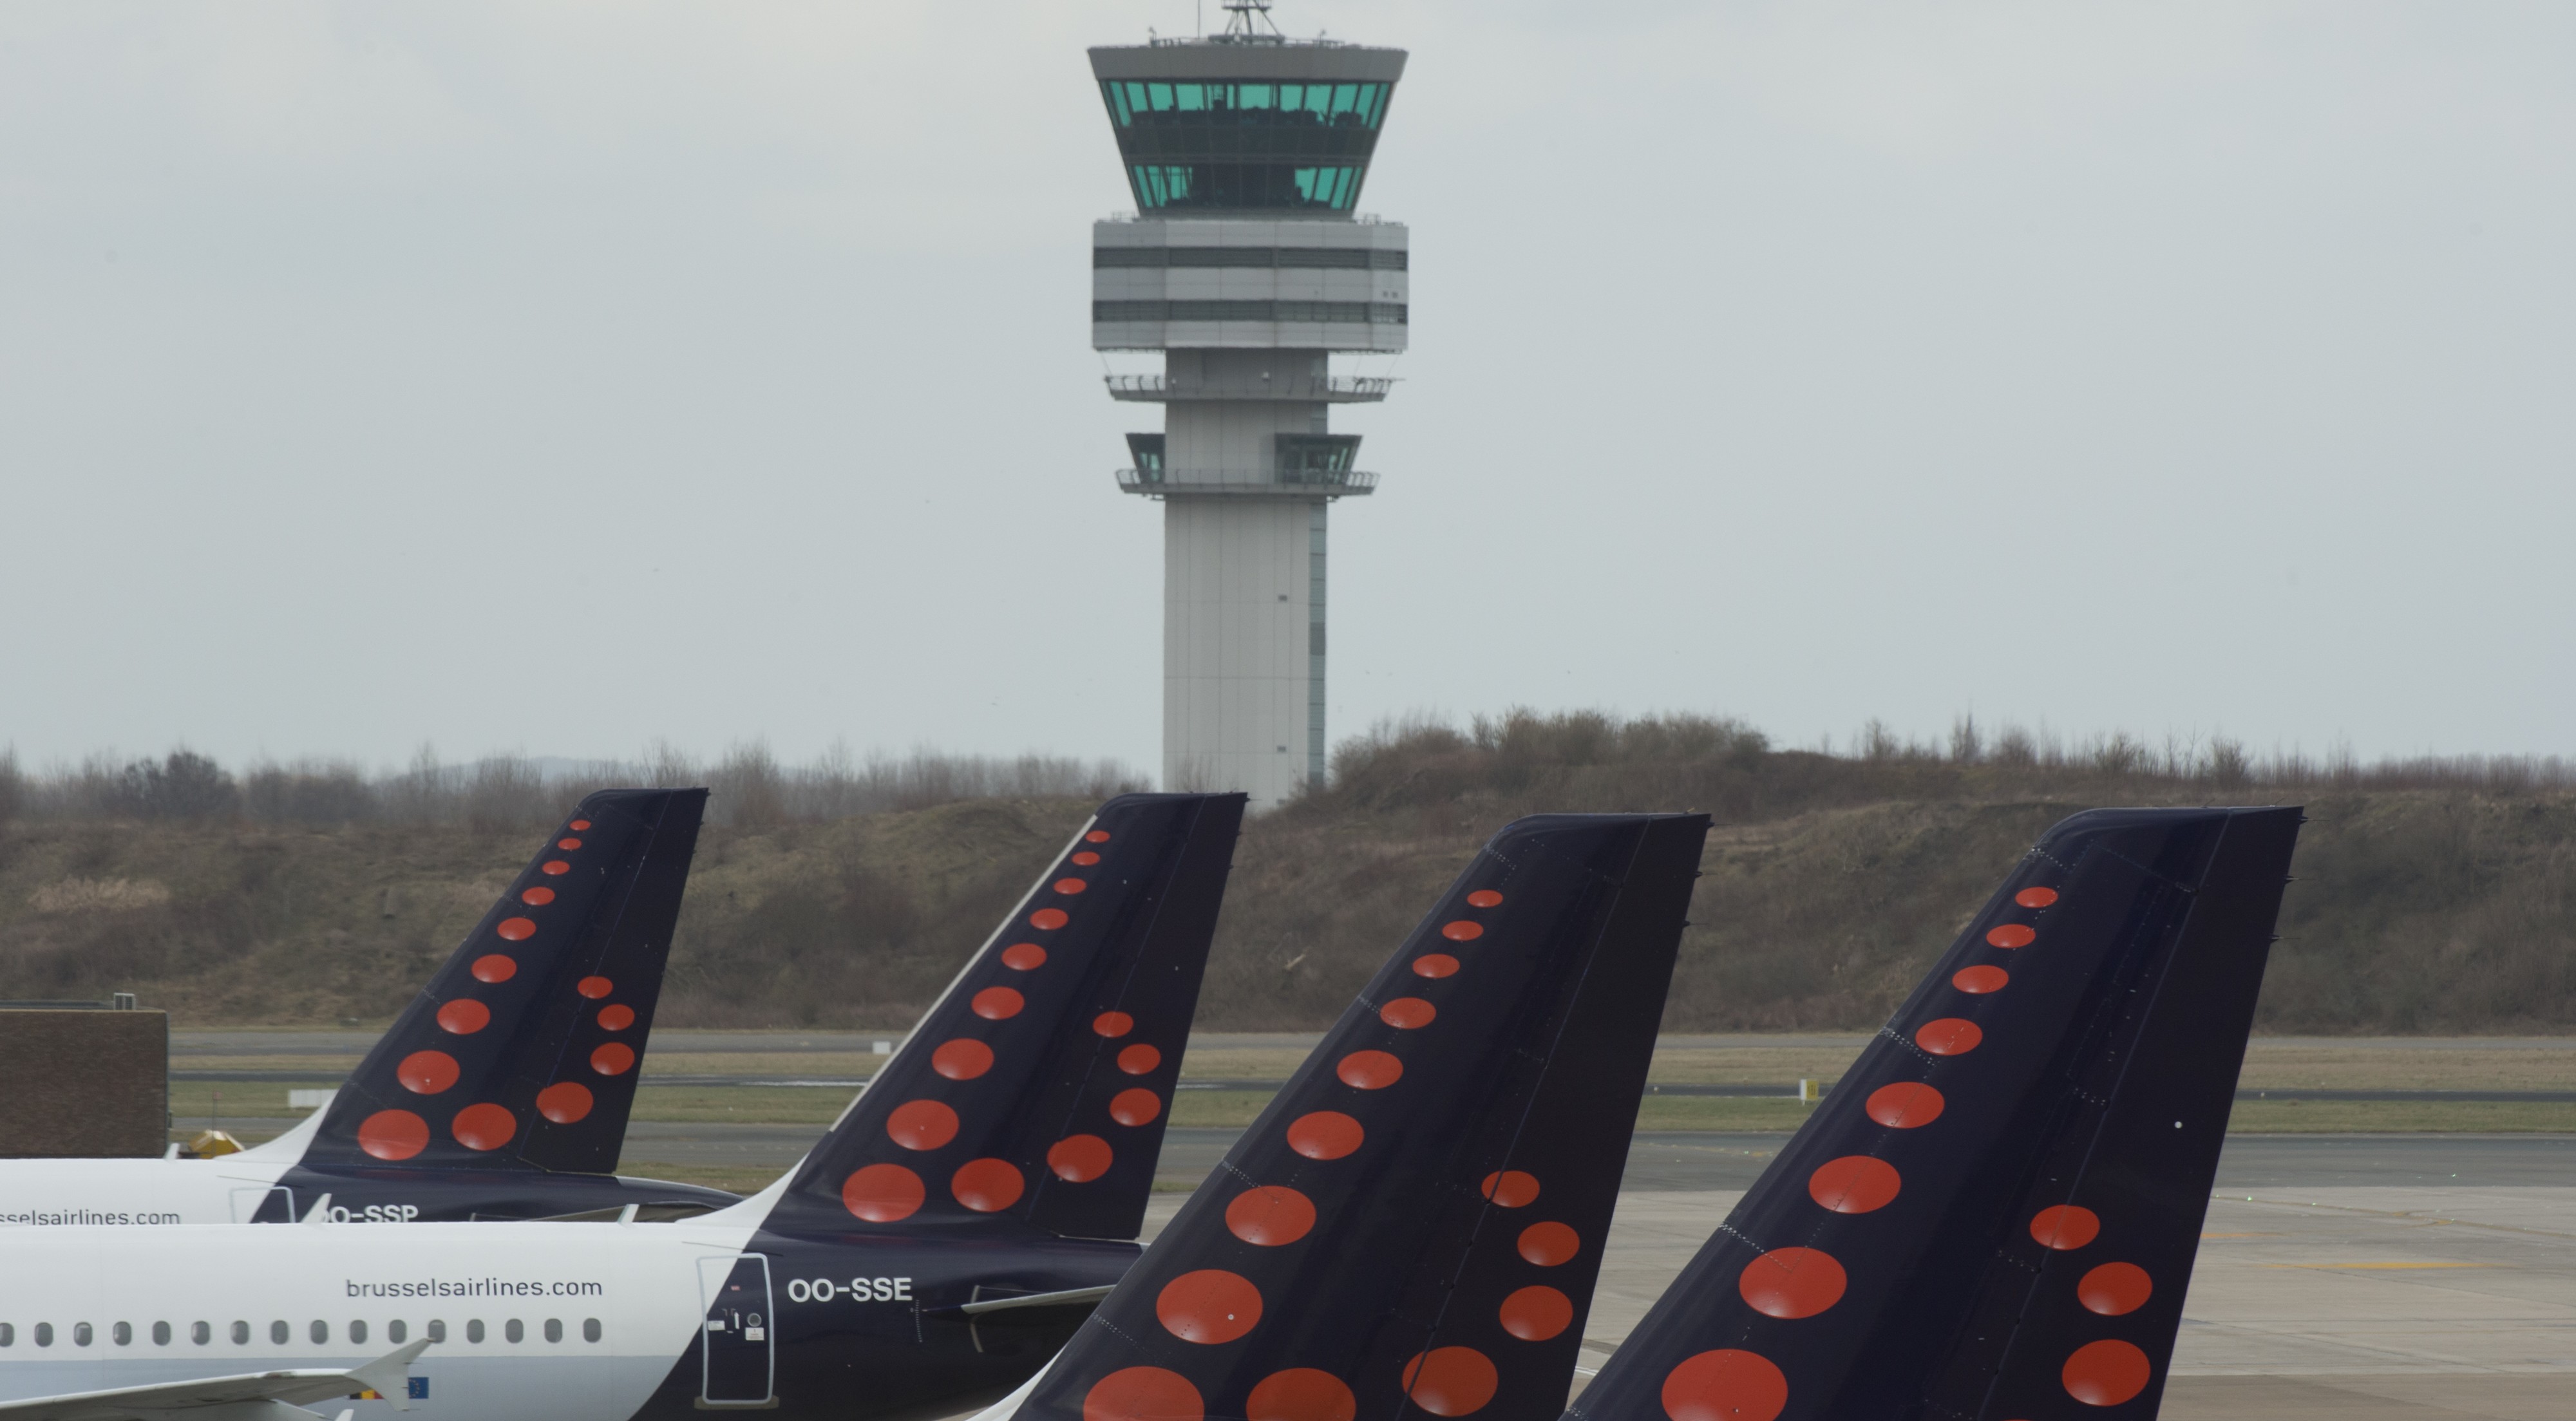 20150304 - ZAVENTEM, BELGIUM: Illustration picture shows Lufthansa and Brussels Airlines airplanes on Wednesday 04 March 2015 at Brussels Airport in Zaventem. BELGA PHOTO BENOIT DOPPAGNE